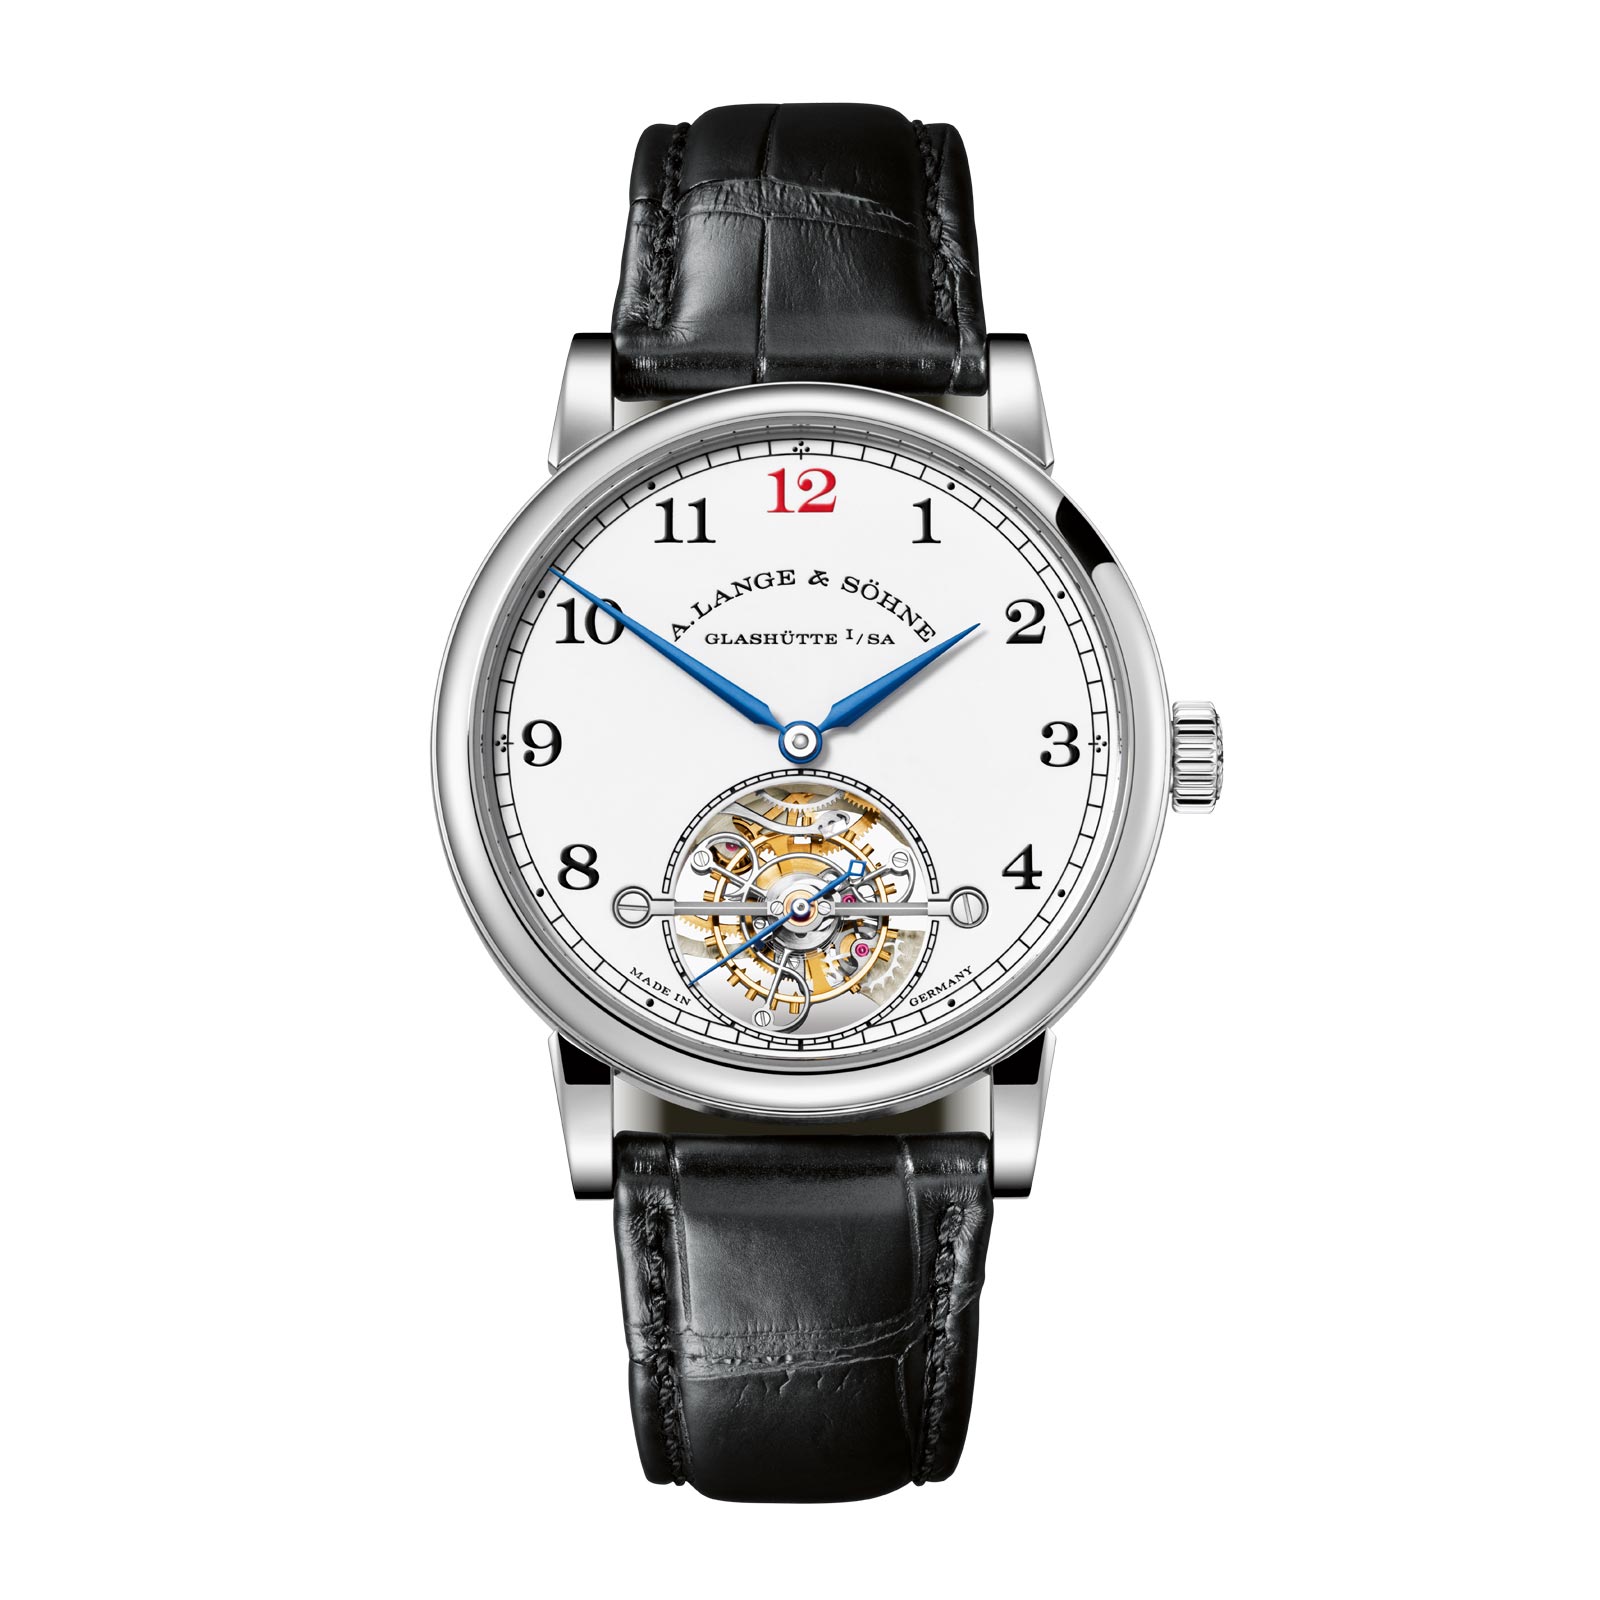 Limited-edition 1815 Tourbillon with enamel dial